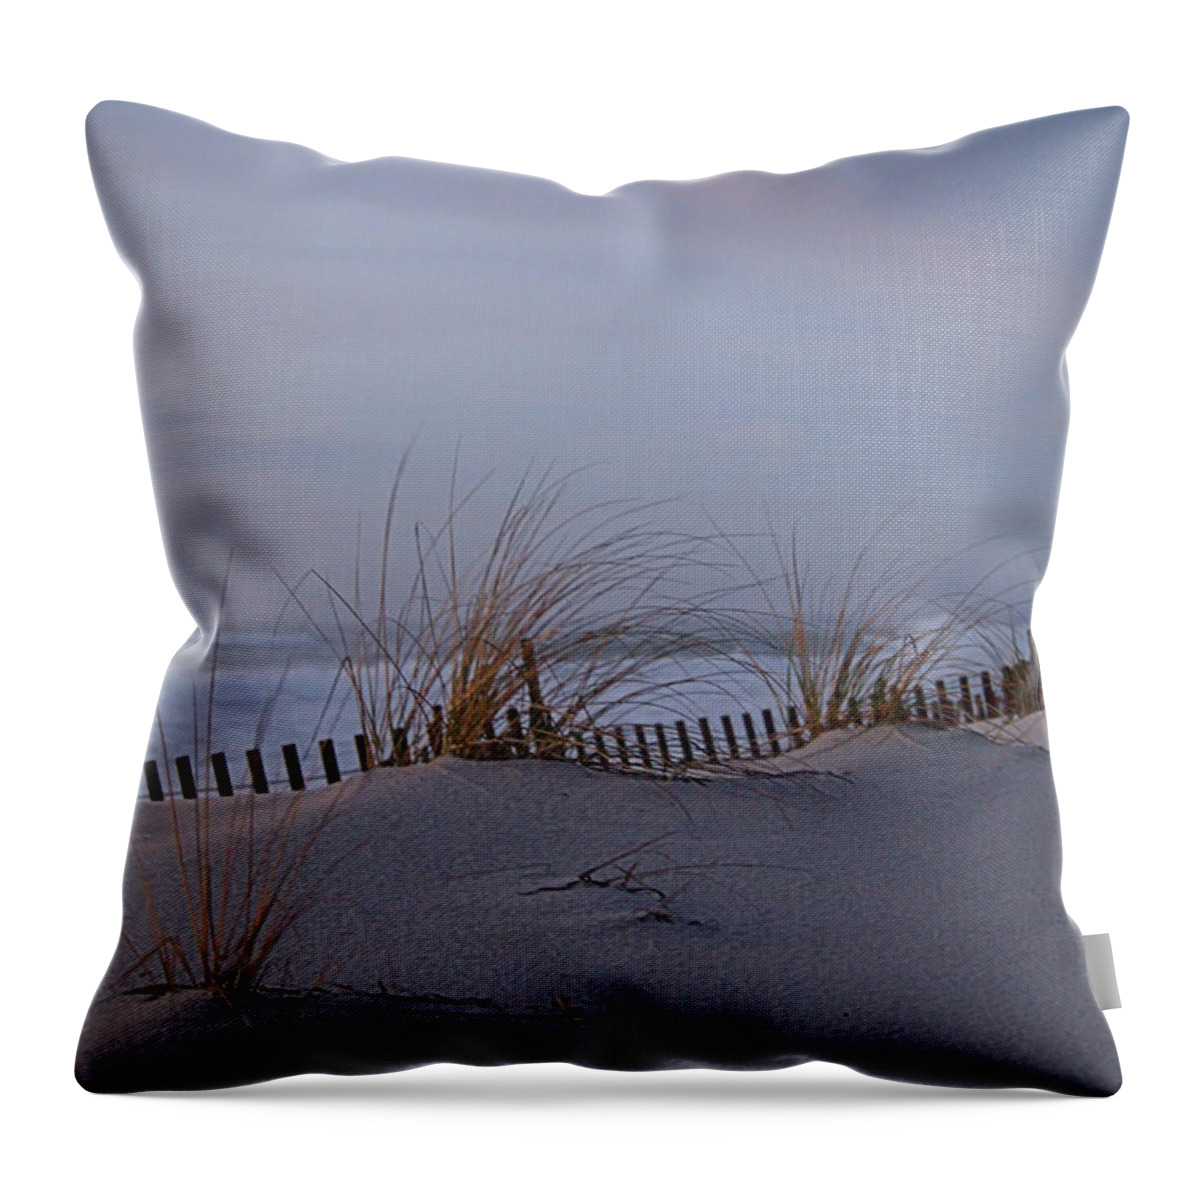 Fog Throw Pillow featuring the photograph Dune View 2 by Newwwman